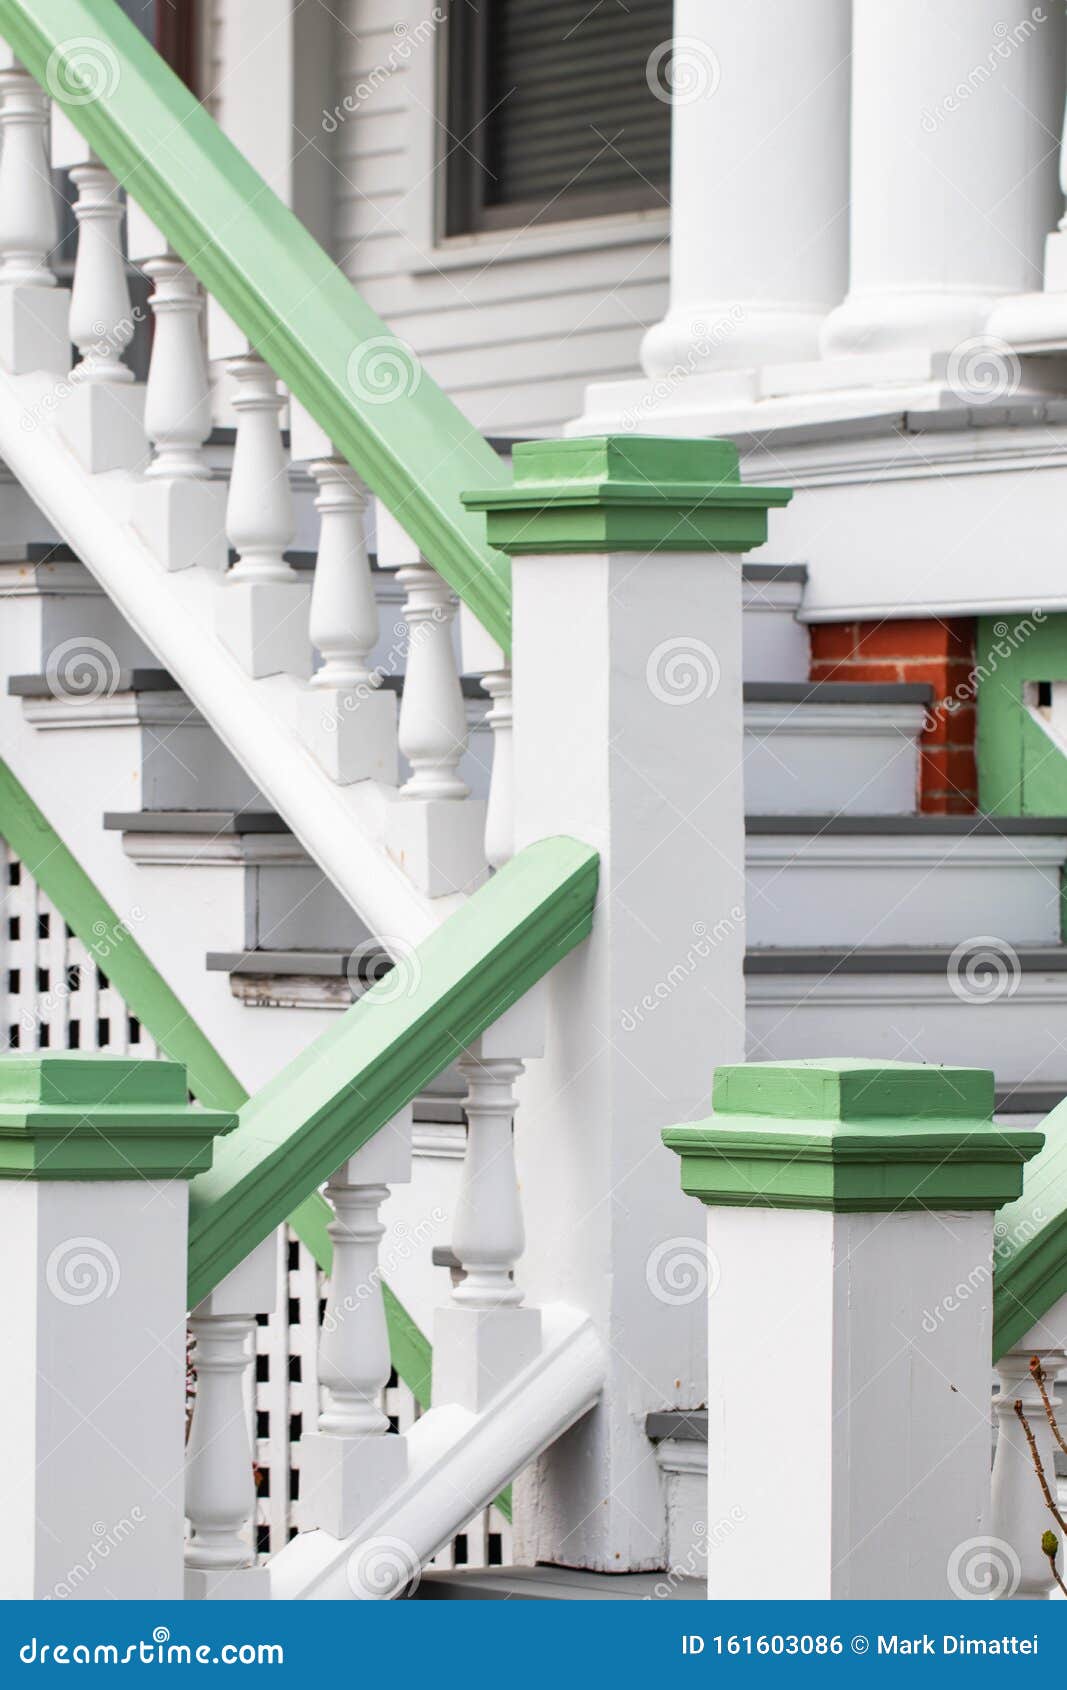 Green and White Paint Porch Design Outside of a House Stock Photo ...